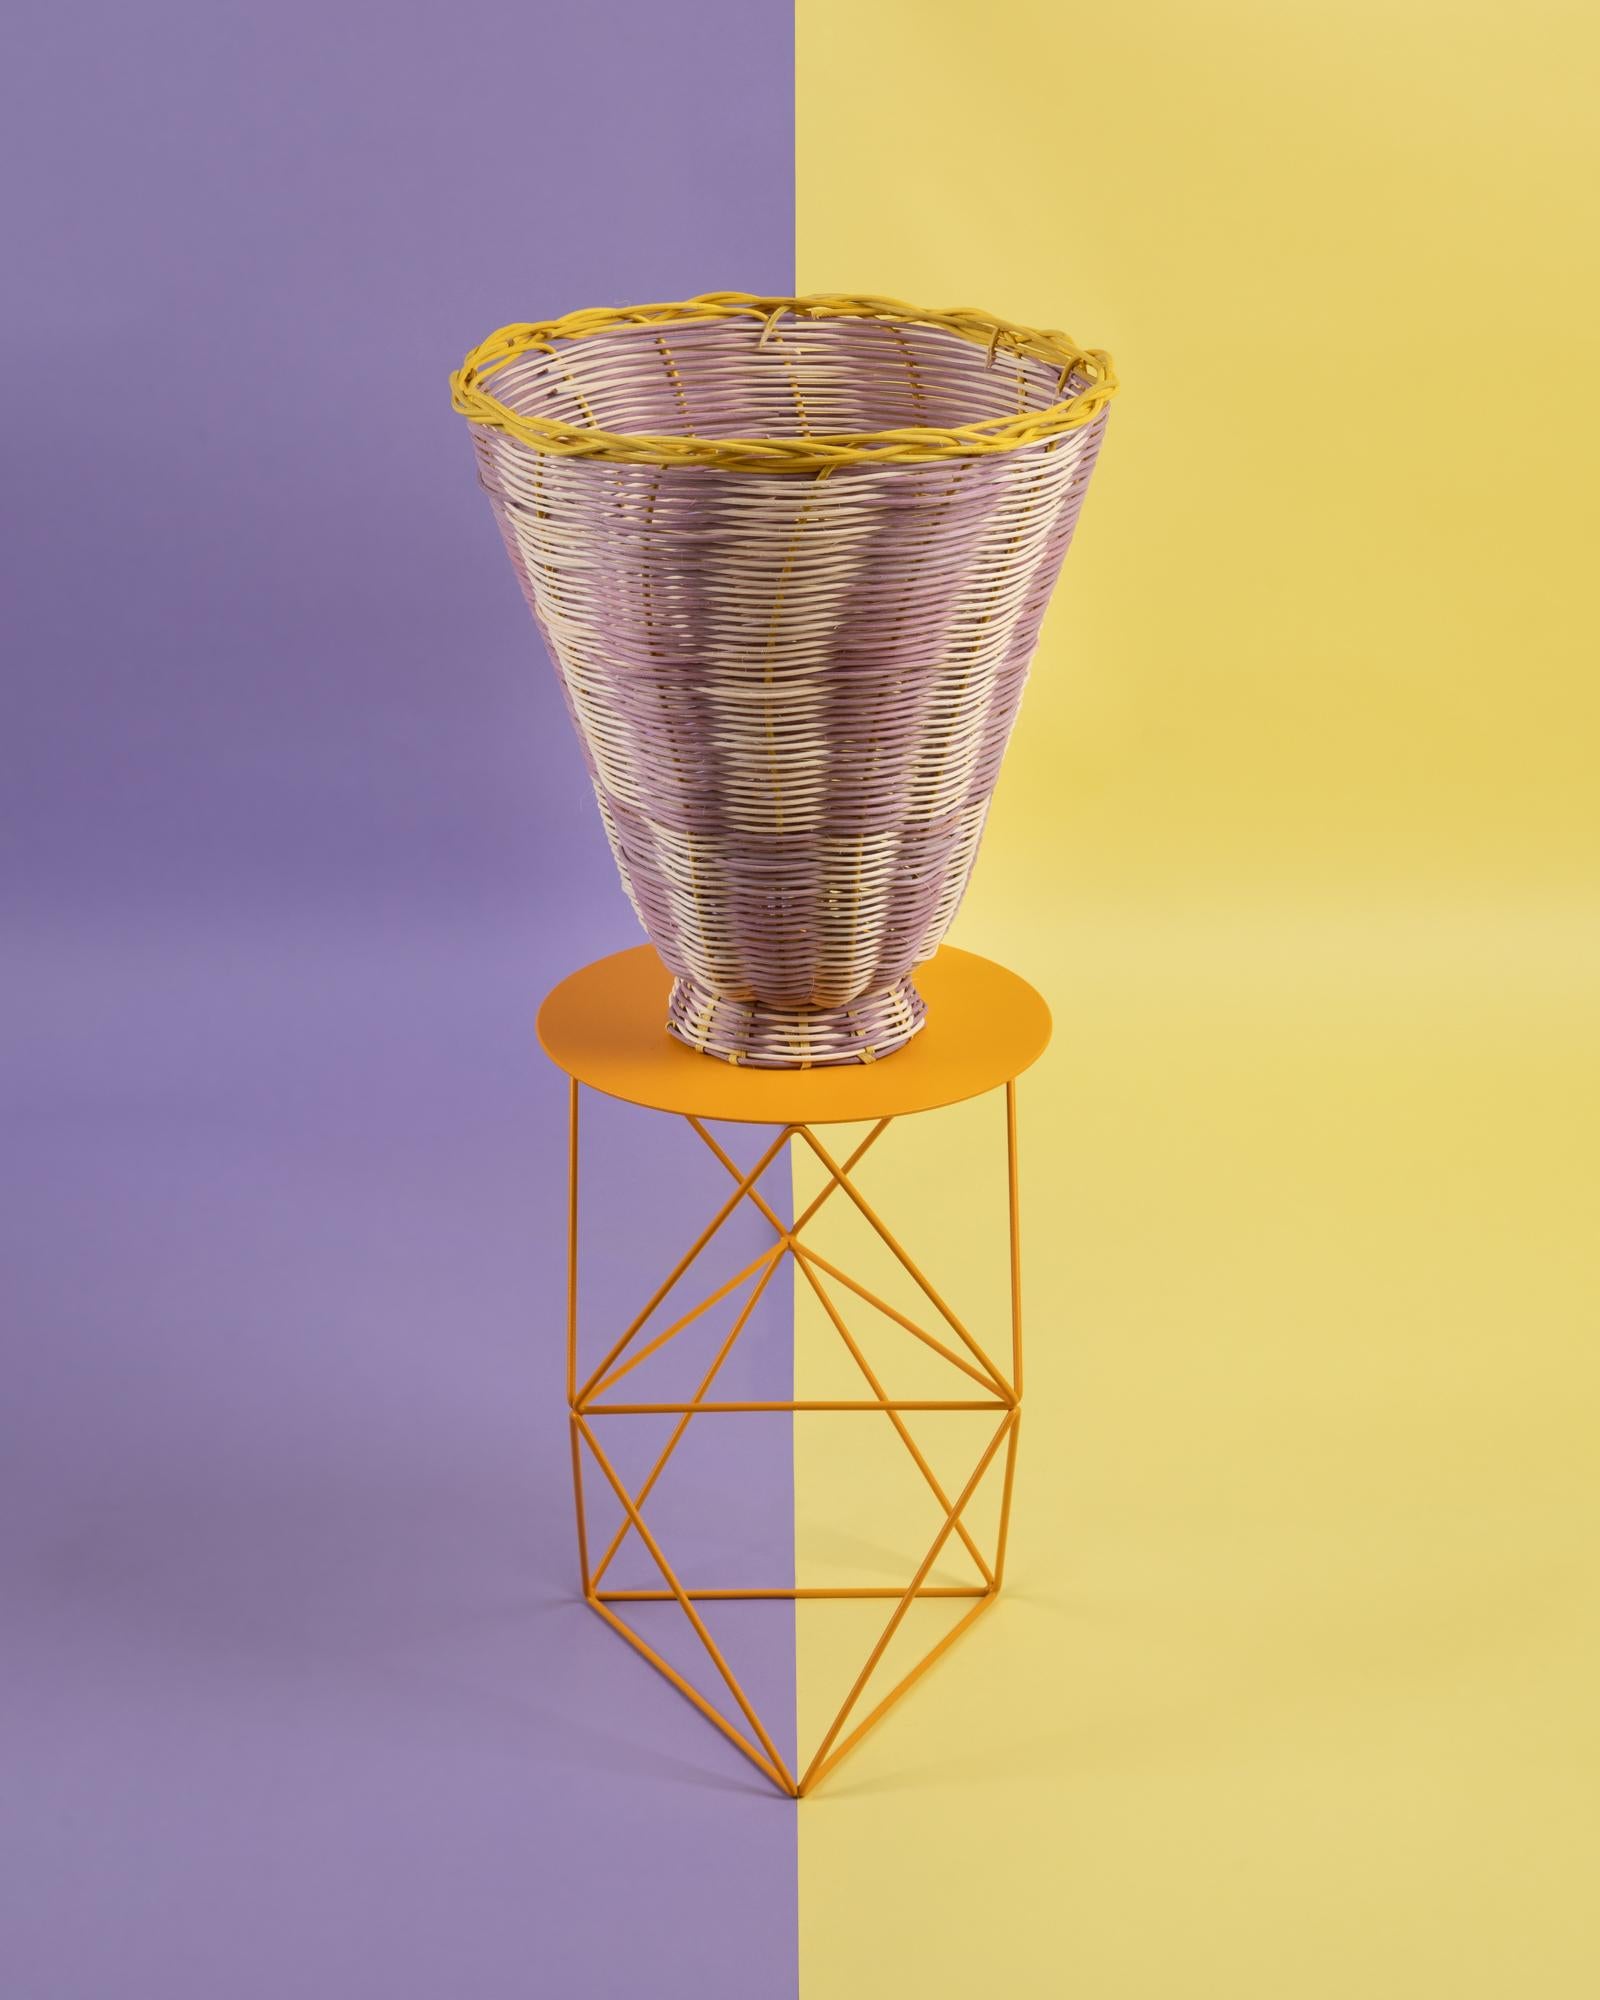 The Petal woven vase is hand dyed and woven with reed in our Chicago studio. Inspired by forms in ancient Greek ceramics, the material language of this vessel brings together the rich craft history of weaving with 3 dimensional form.

All of Studio